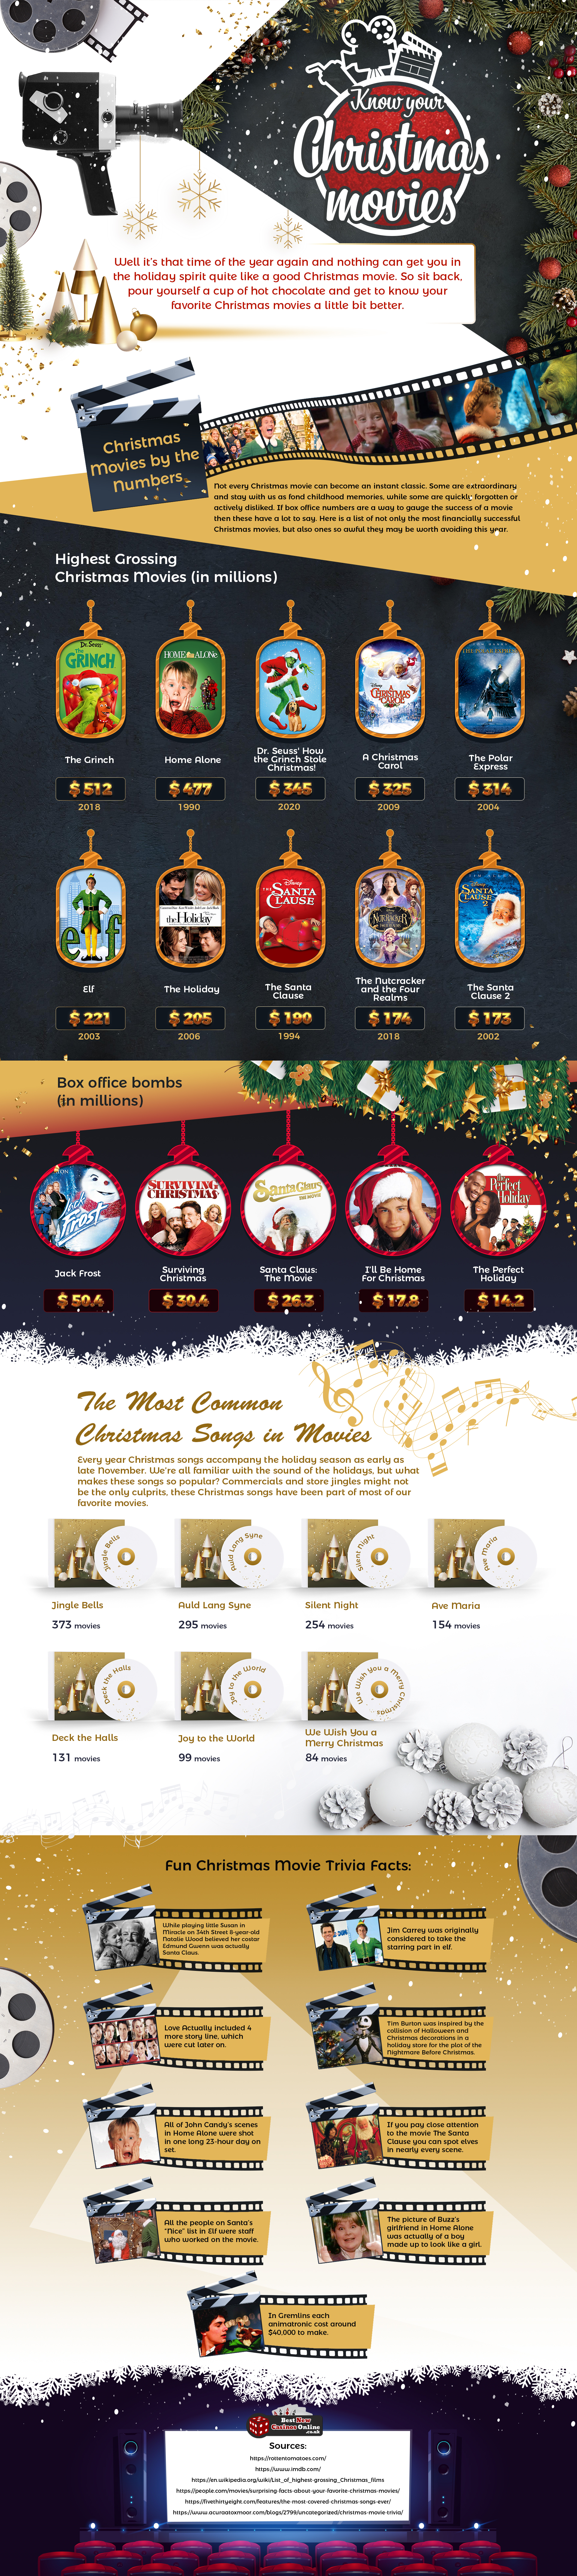 Know Your Christmas Movies Infographic